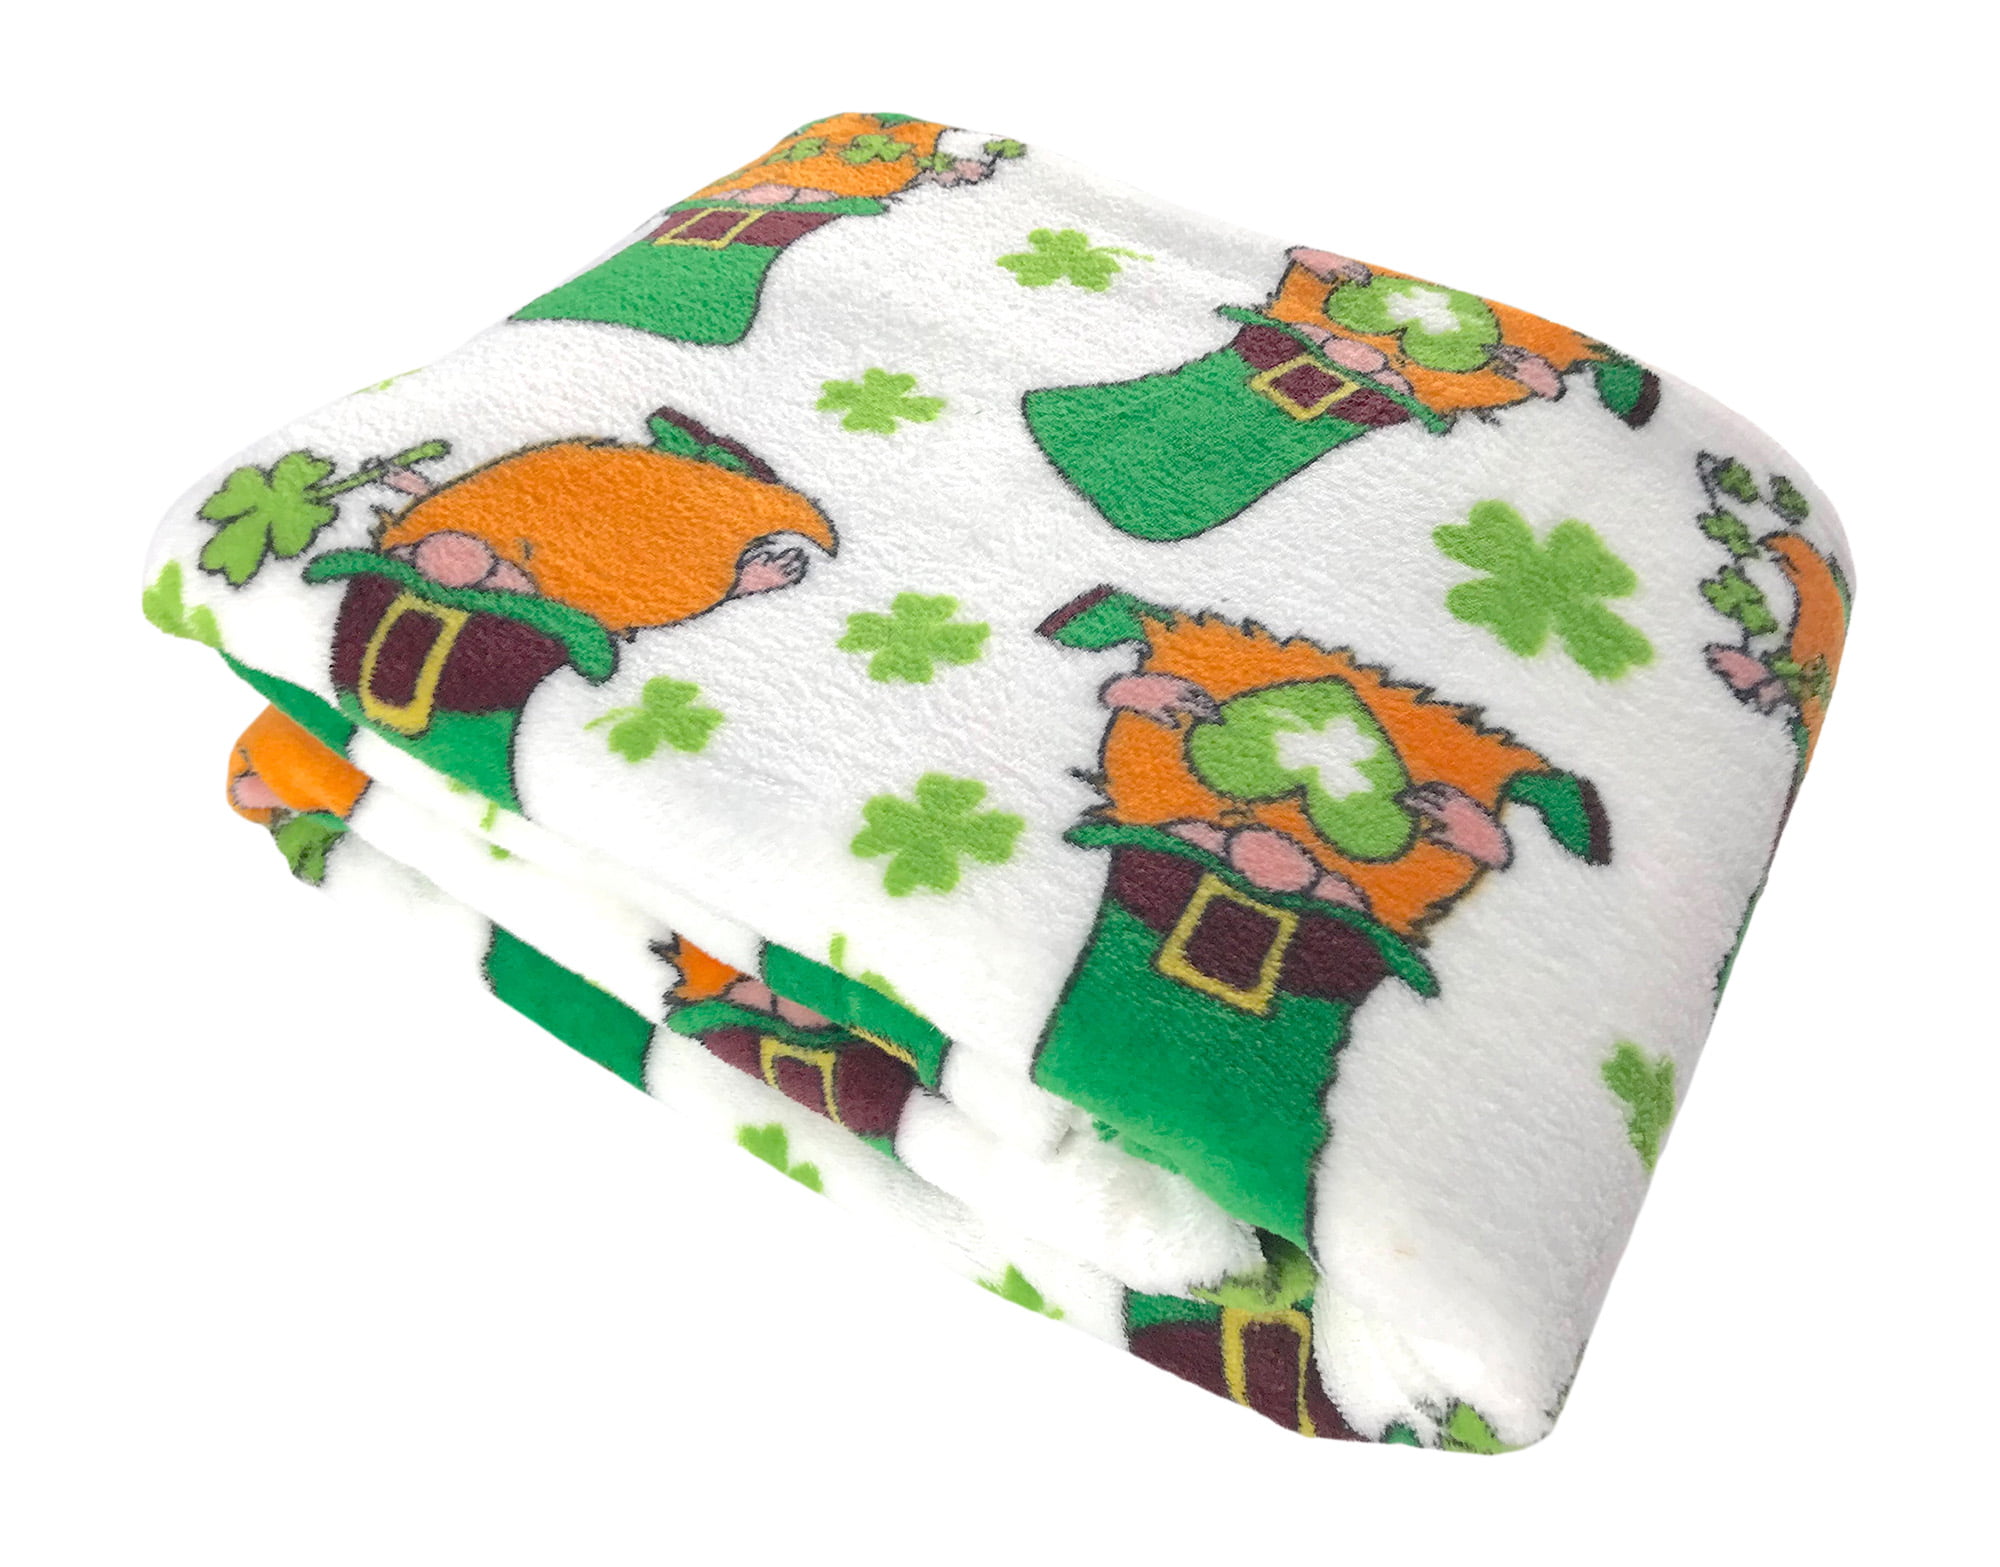 Greens of Ireland Four Leaf Clover Shamrock Design Patrick's Day Soft Throw Blanket White with Clovers St